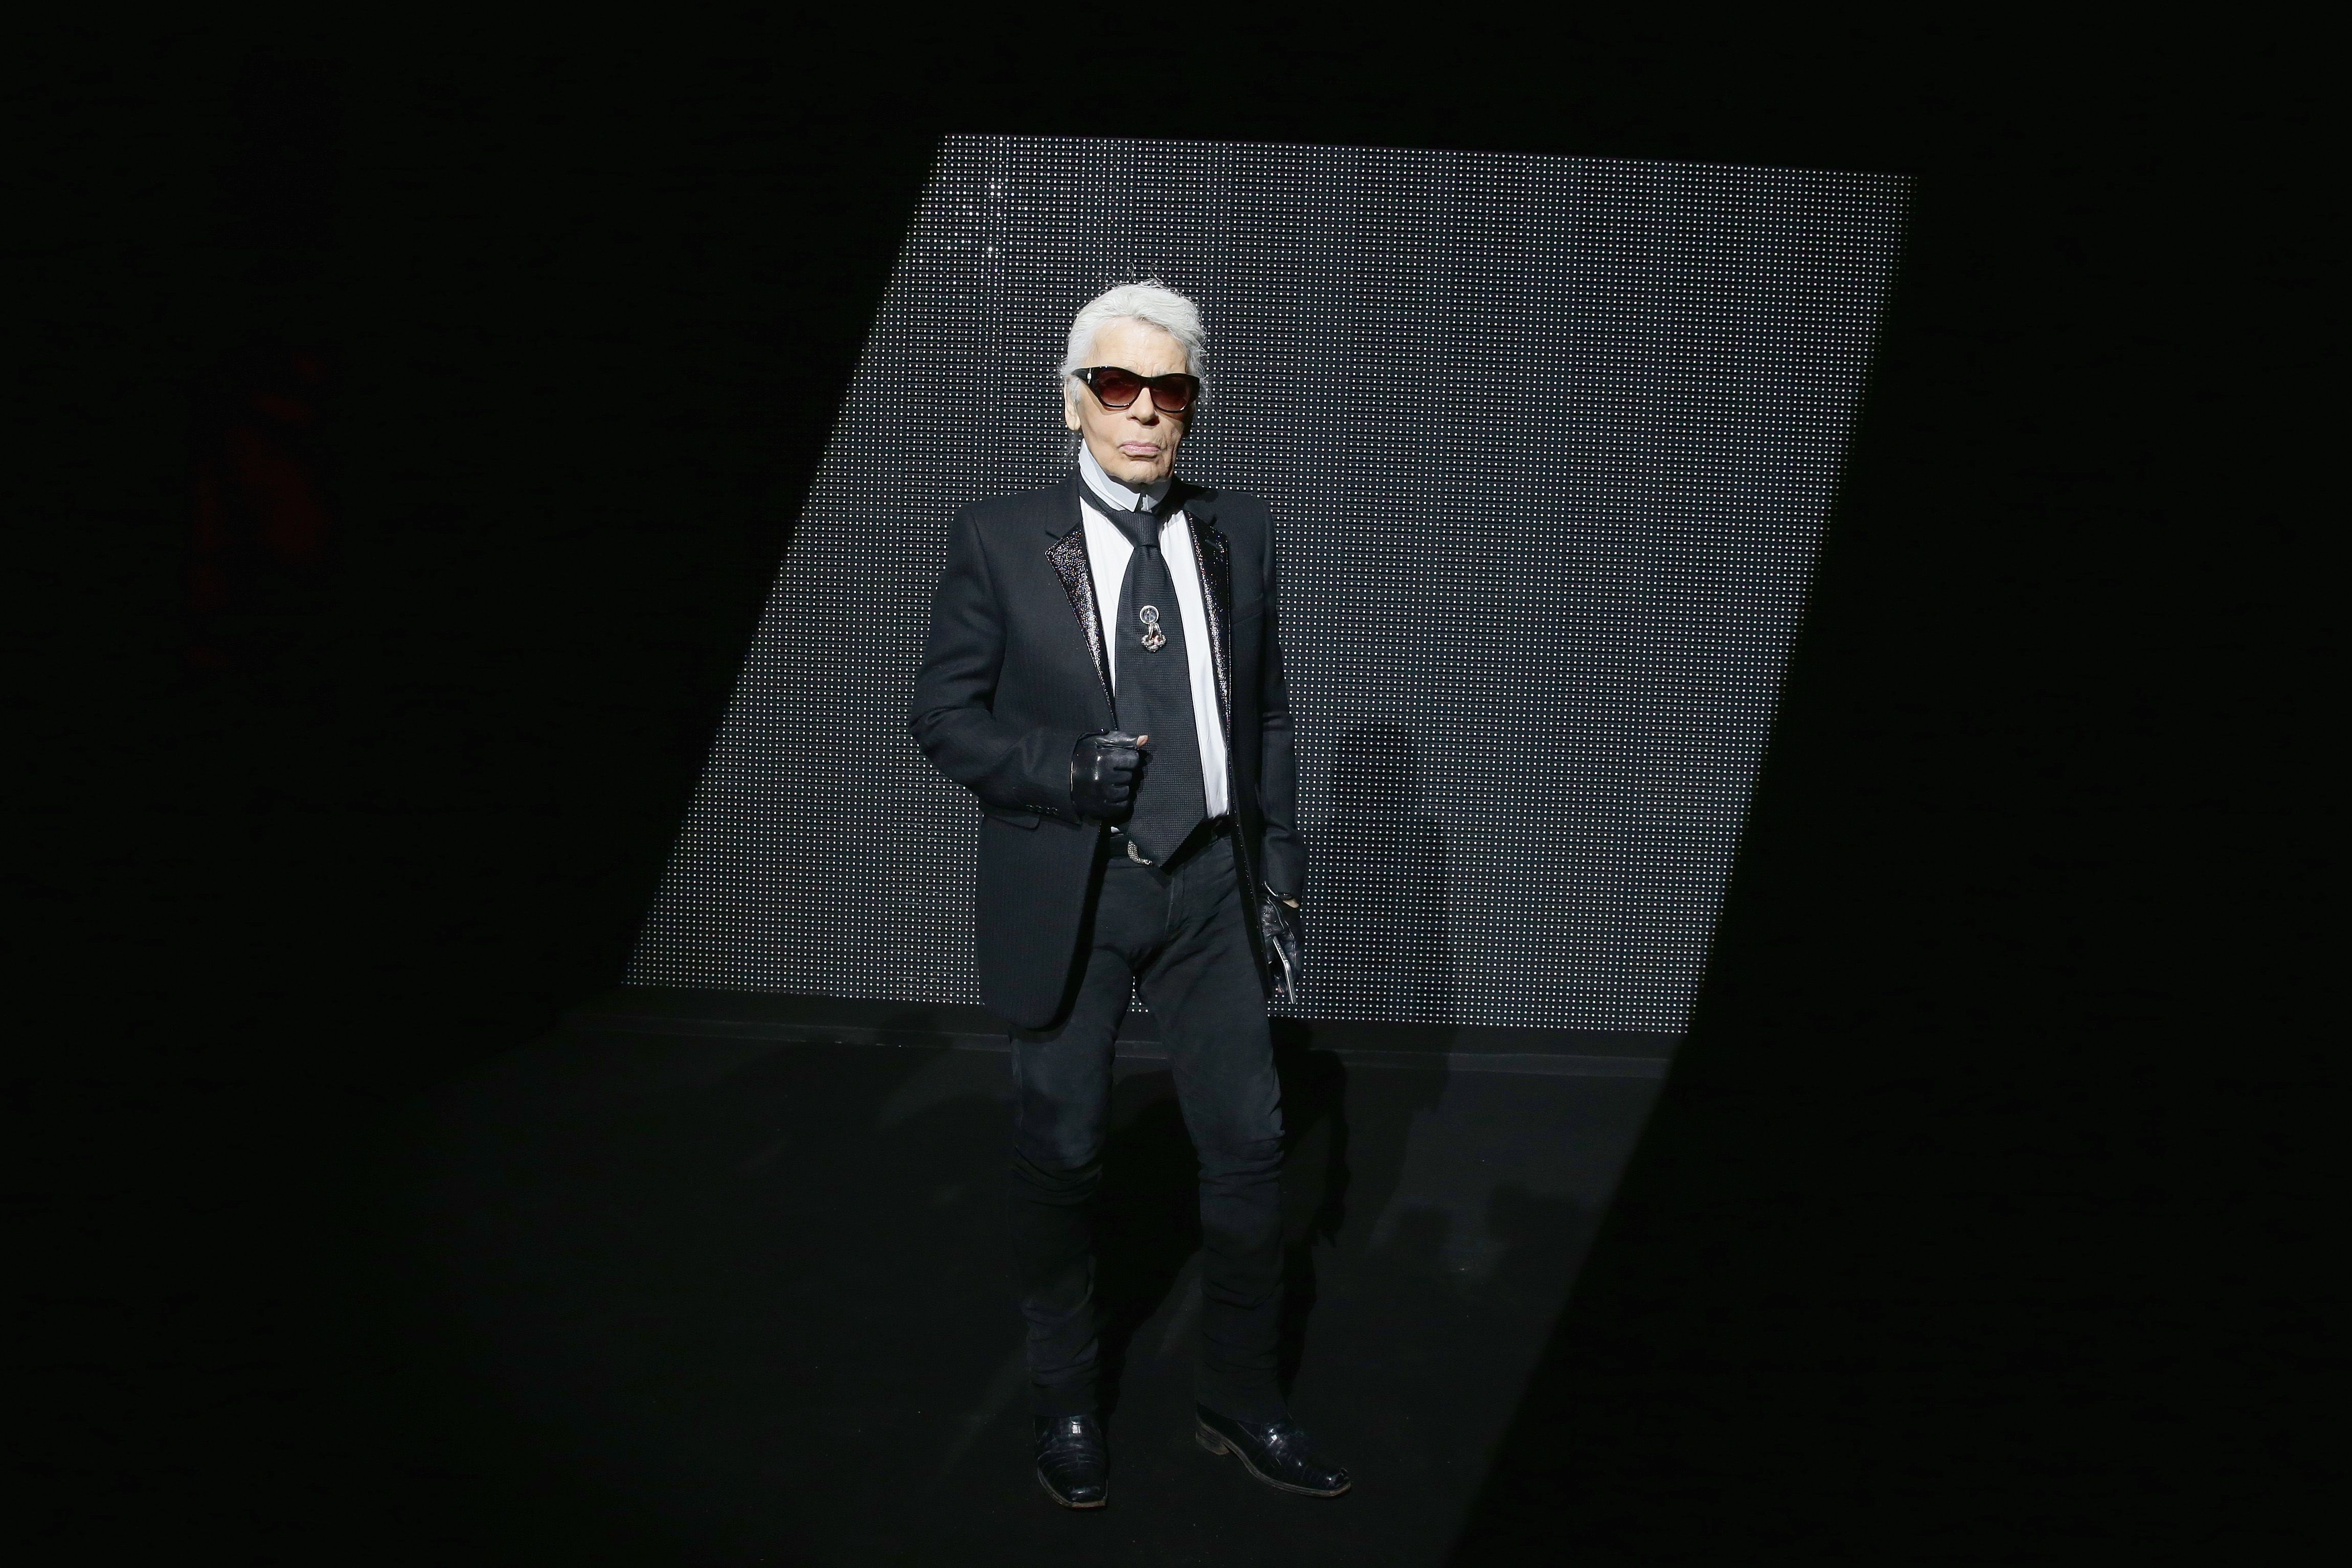 Karl Lagerfeld: the controversial and pioneering designer